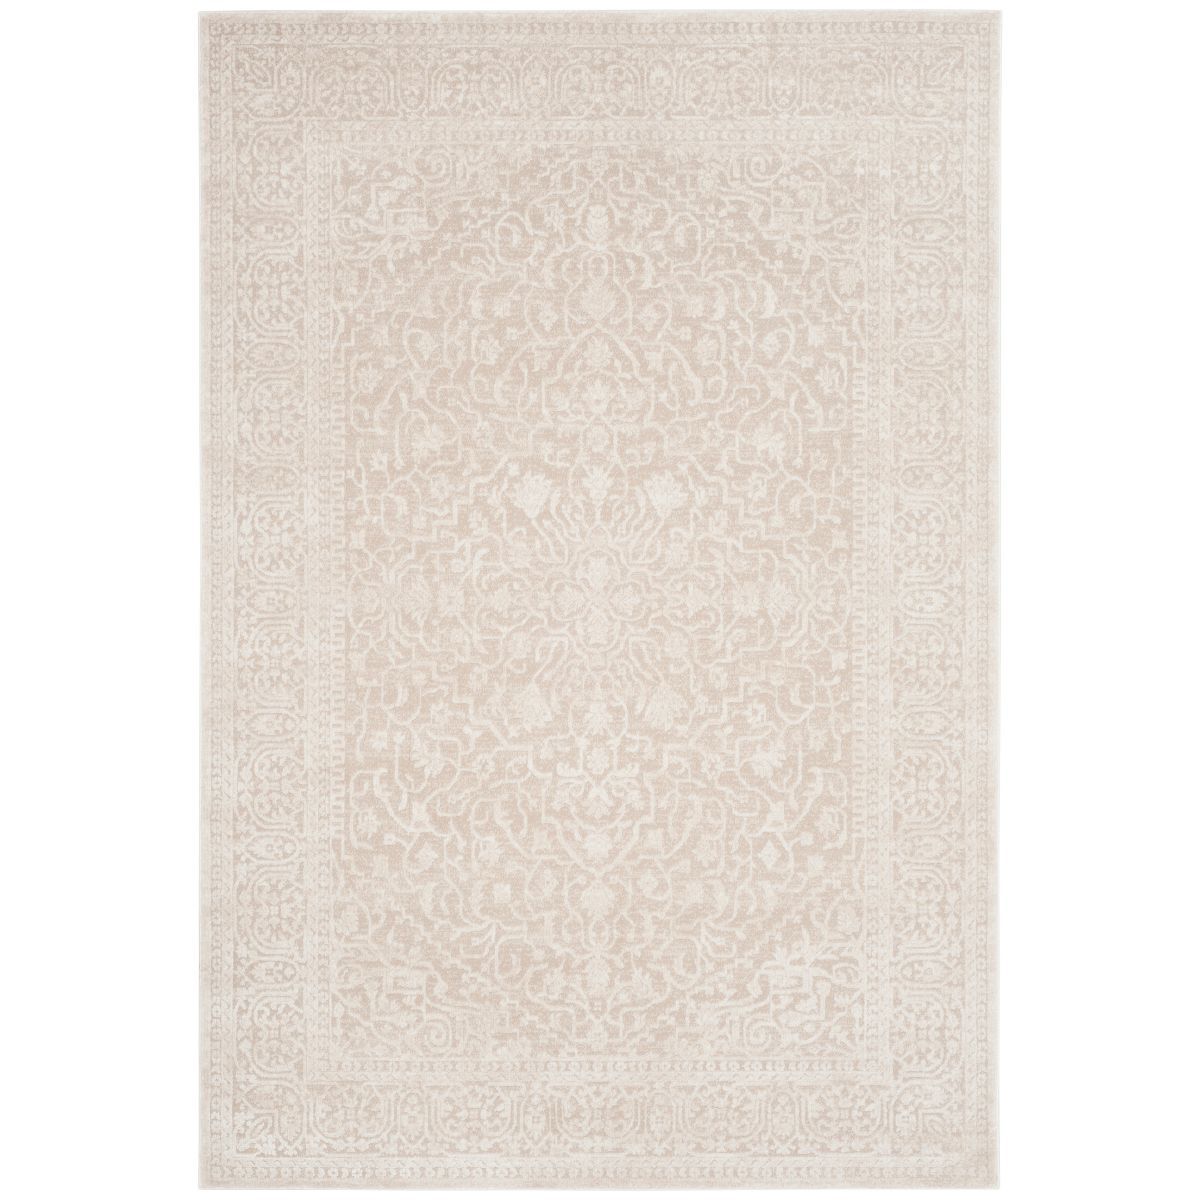 Reflection RFT670 Power Loomed Area Rug - Creme/Ivory - 8'x10' - Safavieh | Target